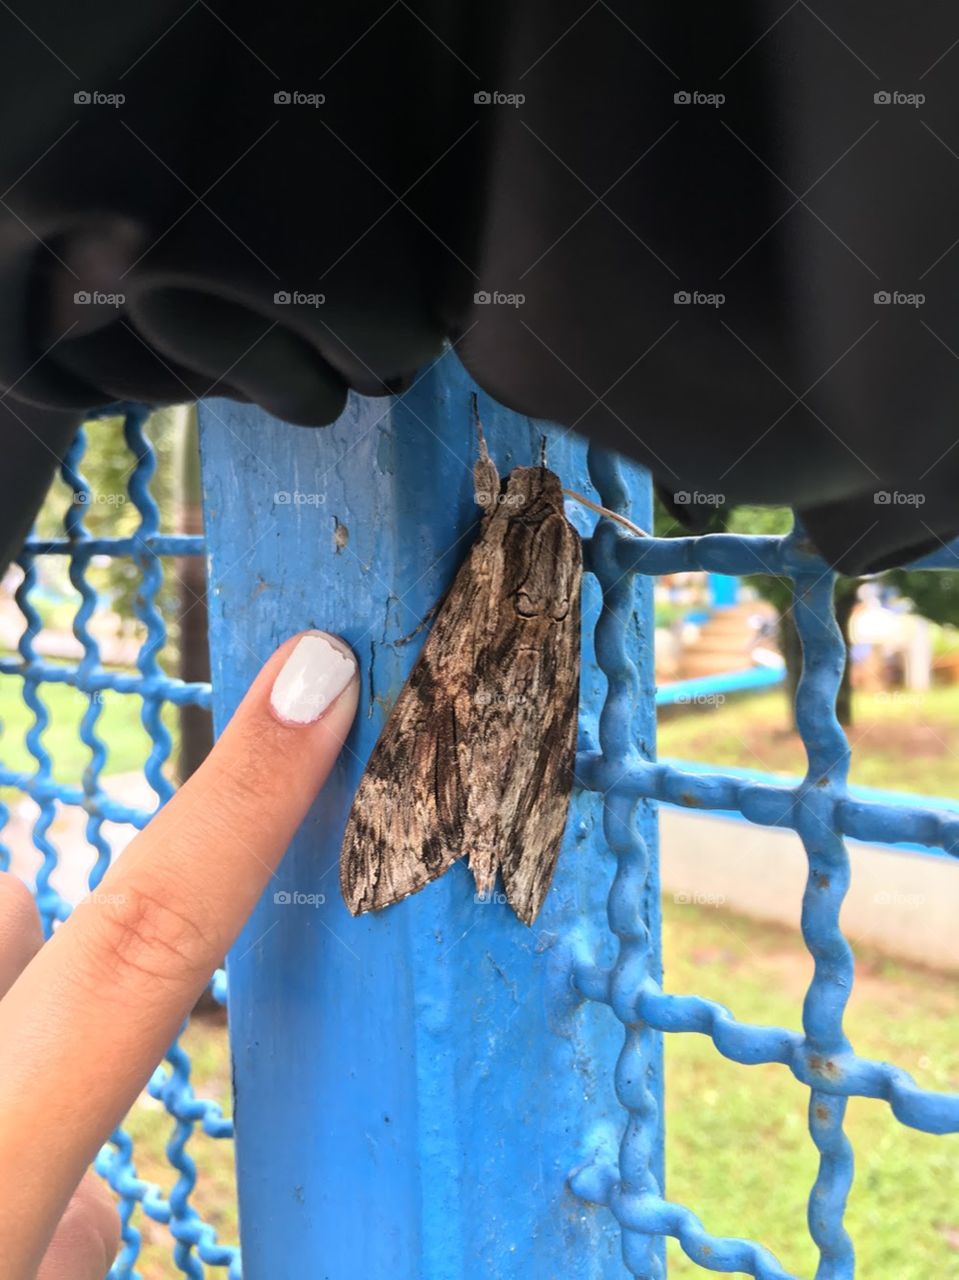 This beautiful moth stand out on top of this sky blue fence. It’s distinct blend of Browns allow this not so shy fellow to stand out.